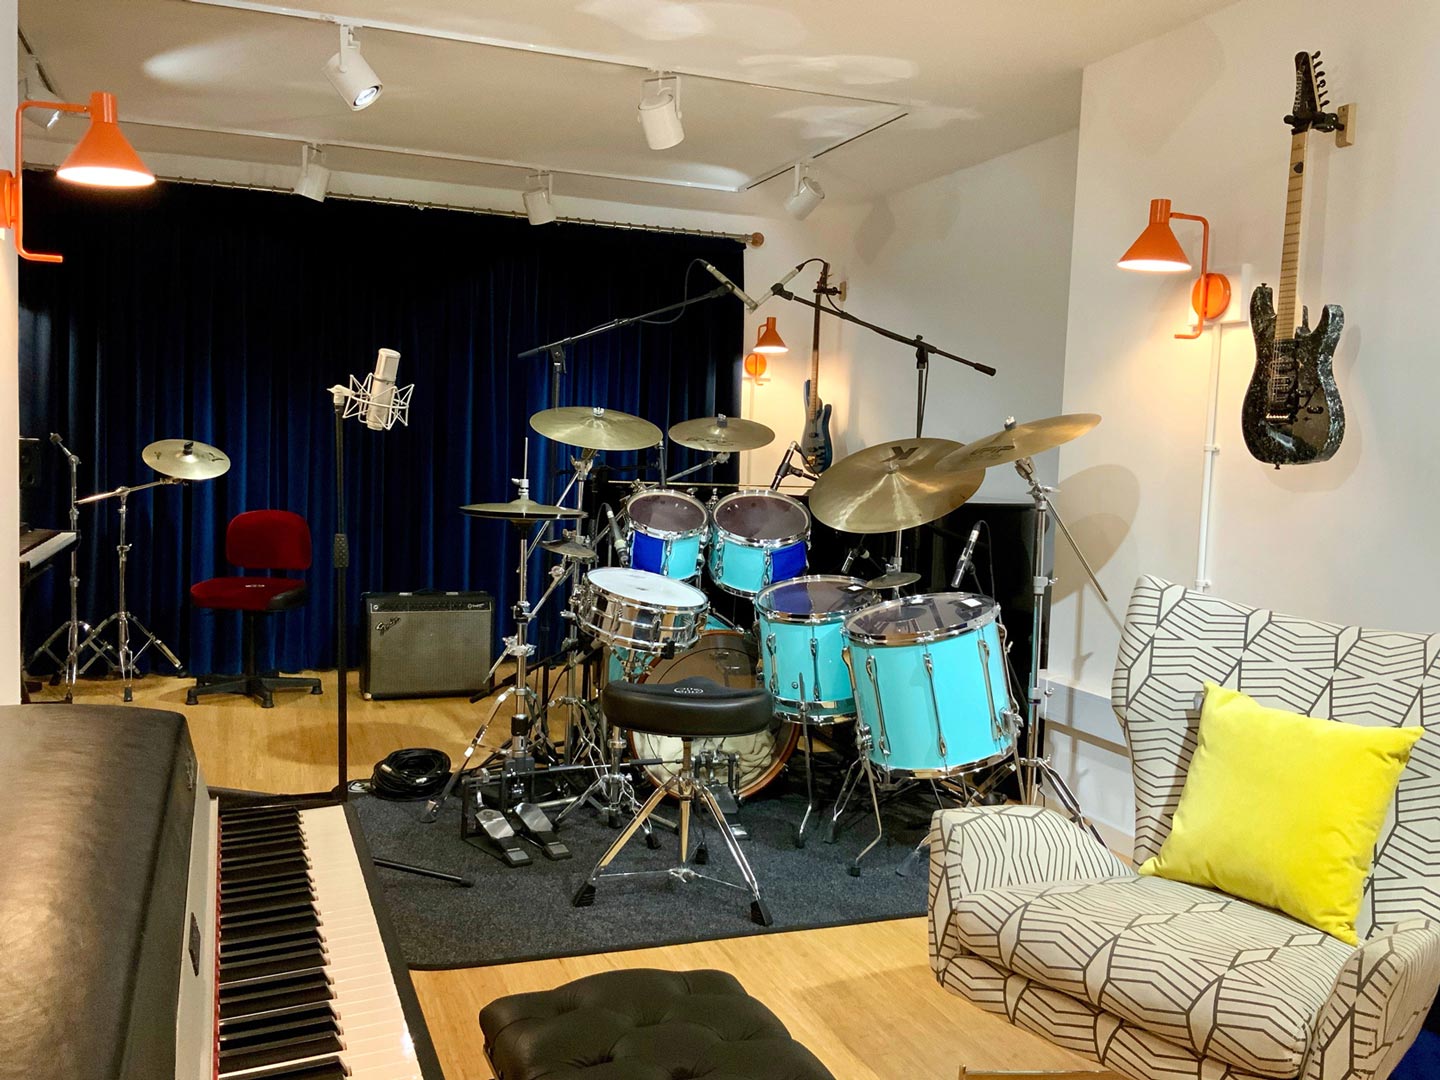 Recording studio with Rhodes piano, drum kit, grand piano, guitars, microphones, keyboard, spot lights.